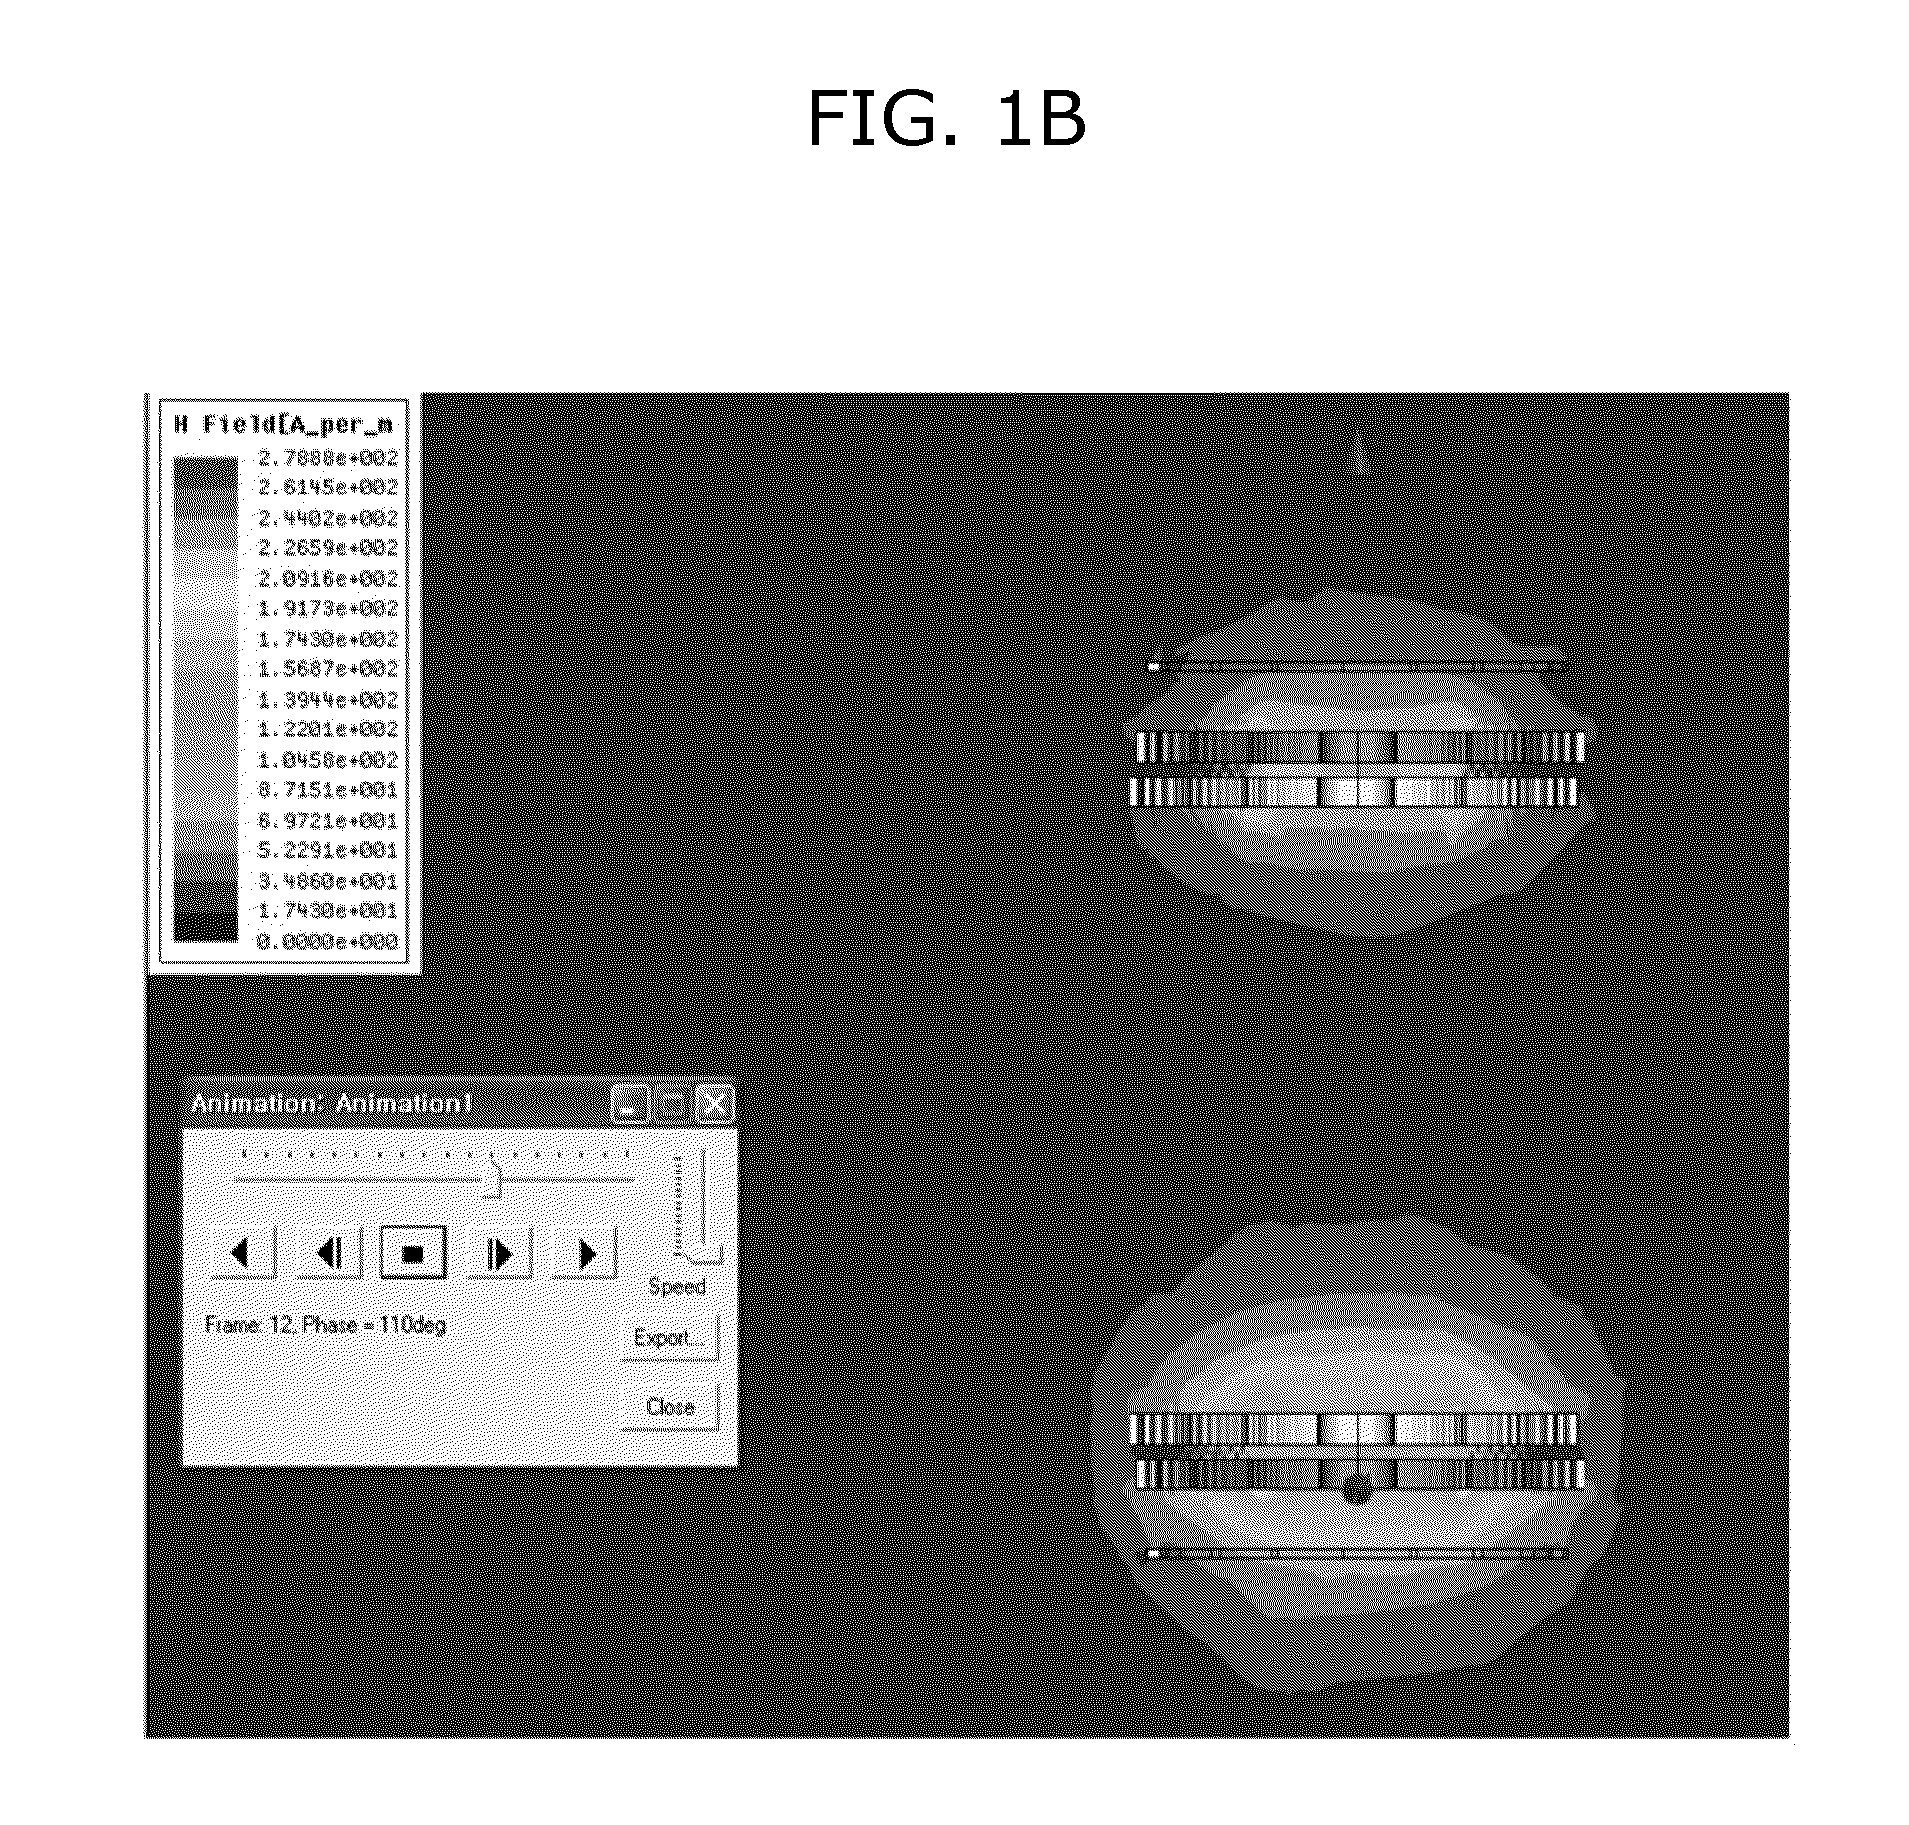 Wireless energy transfer apparatus and method for manufacturing the same